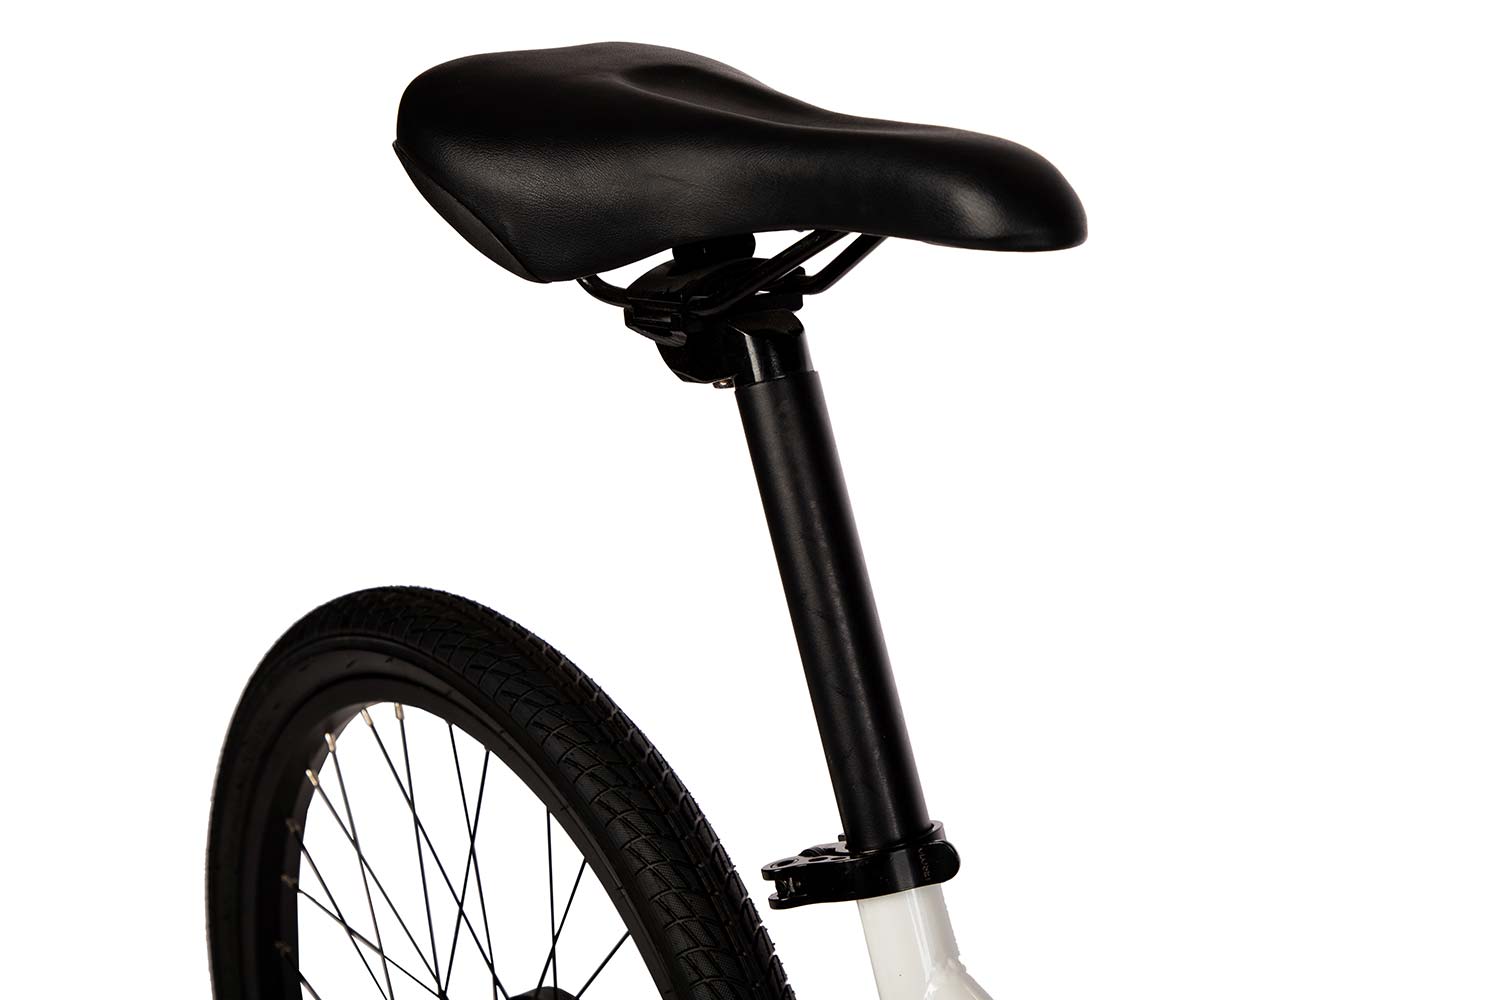 A studio detail of the saddle and adjustable seatpost on the Strider 20x Sport, a 20" all-in-one balance and pedal bike